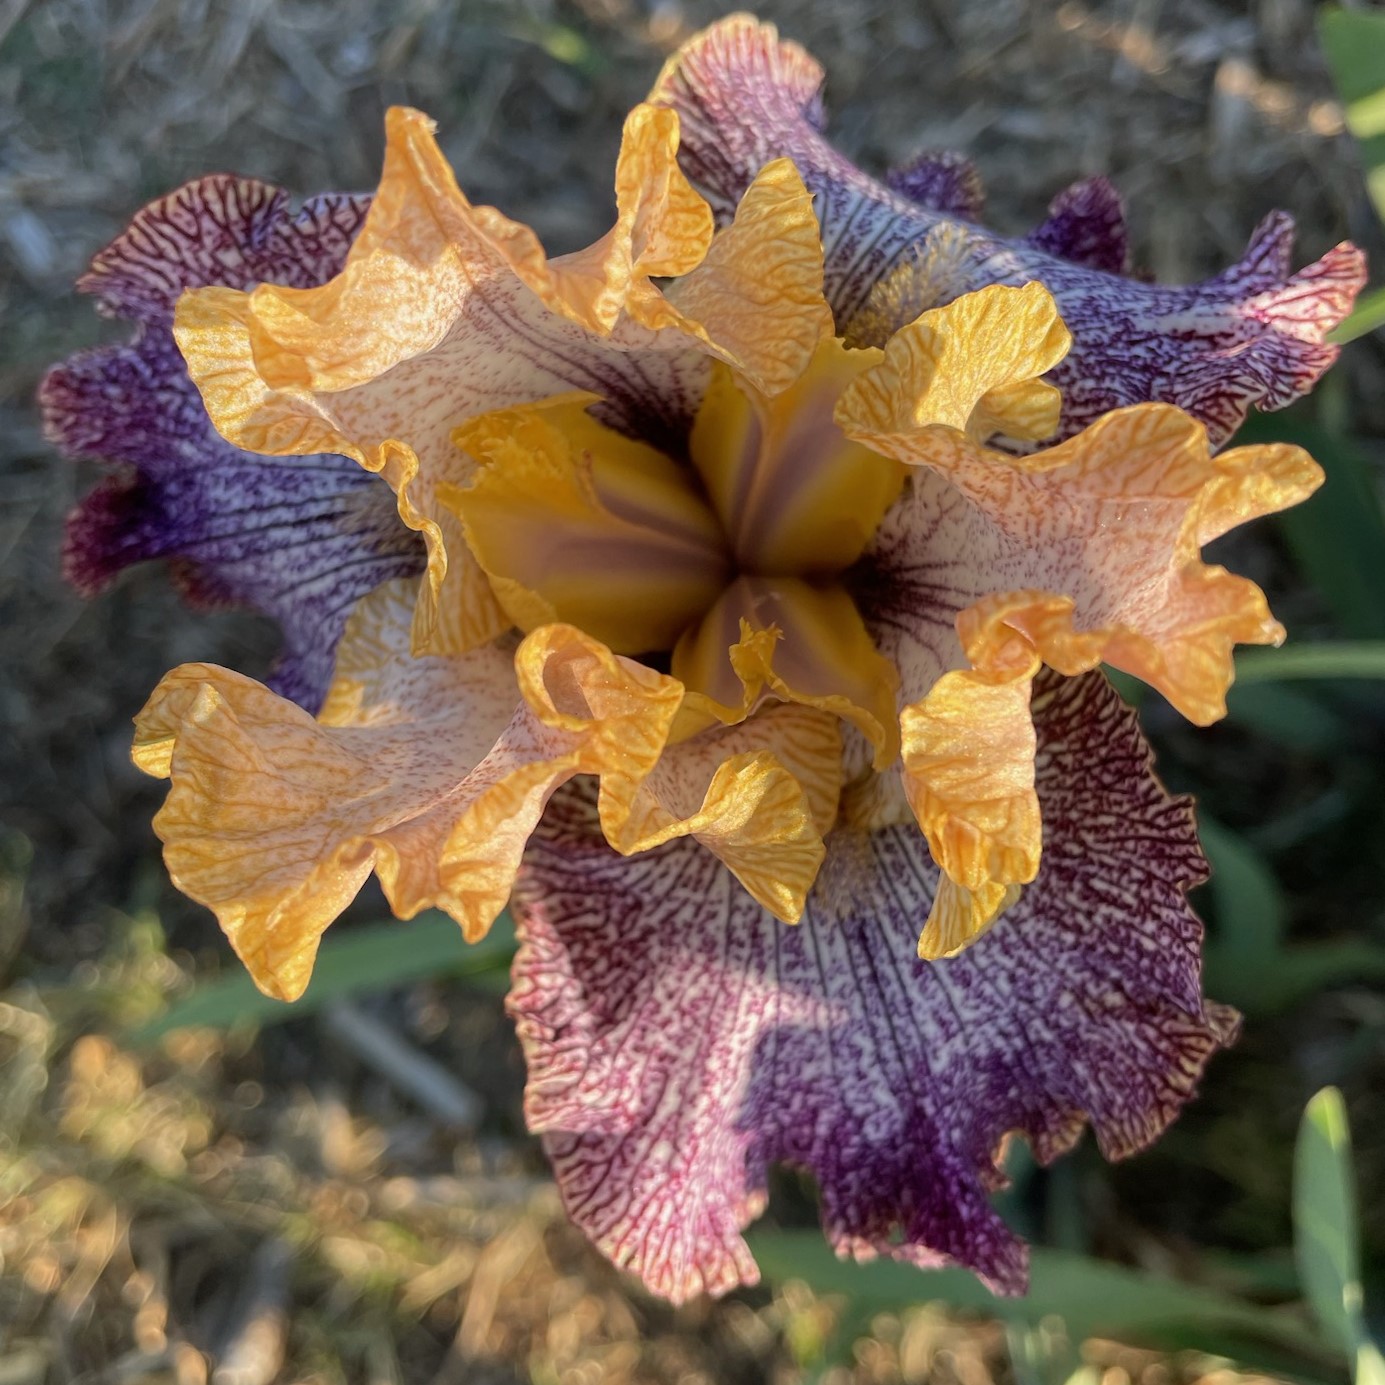 TEMORAL ANOMALY IRIS FOR SALE ONLINE